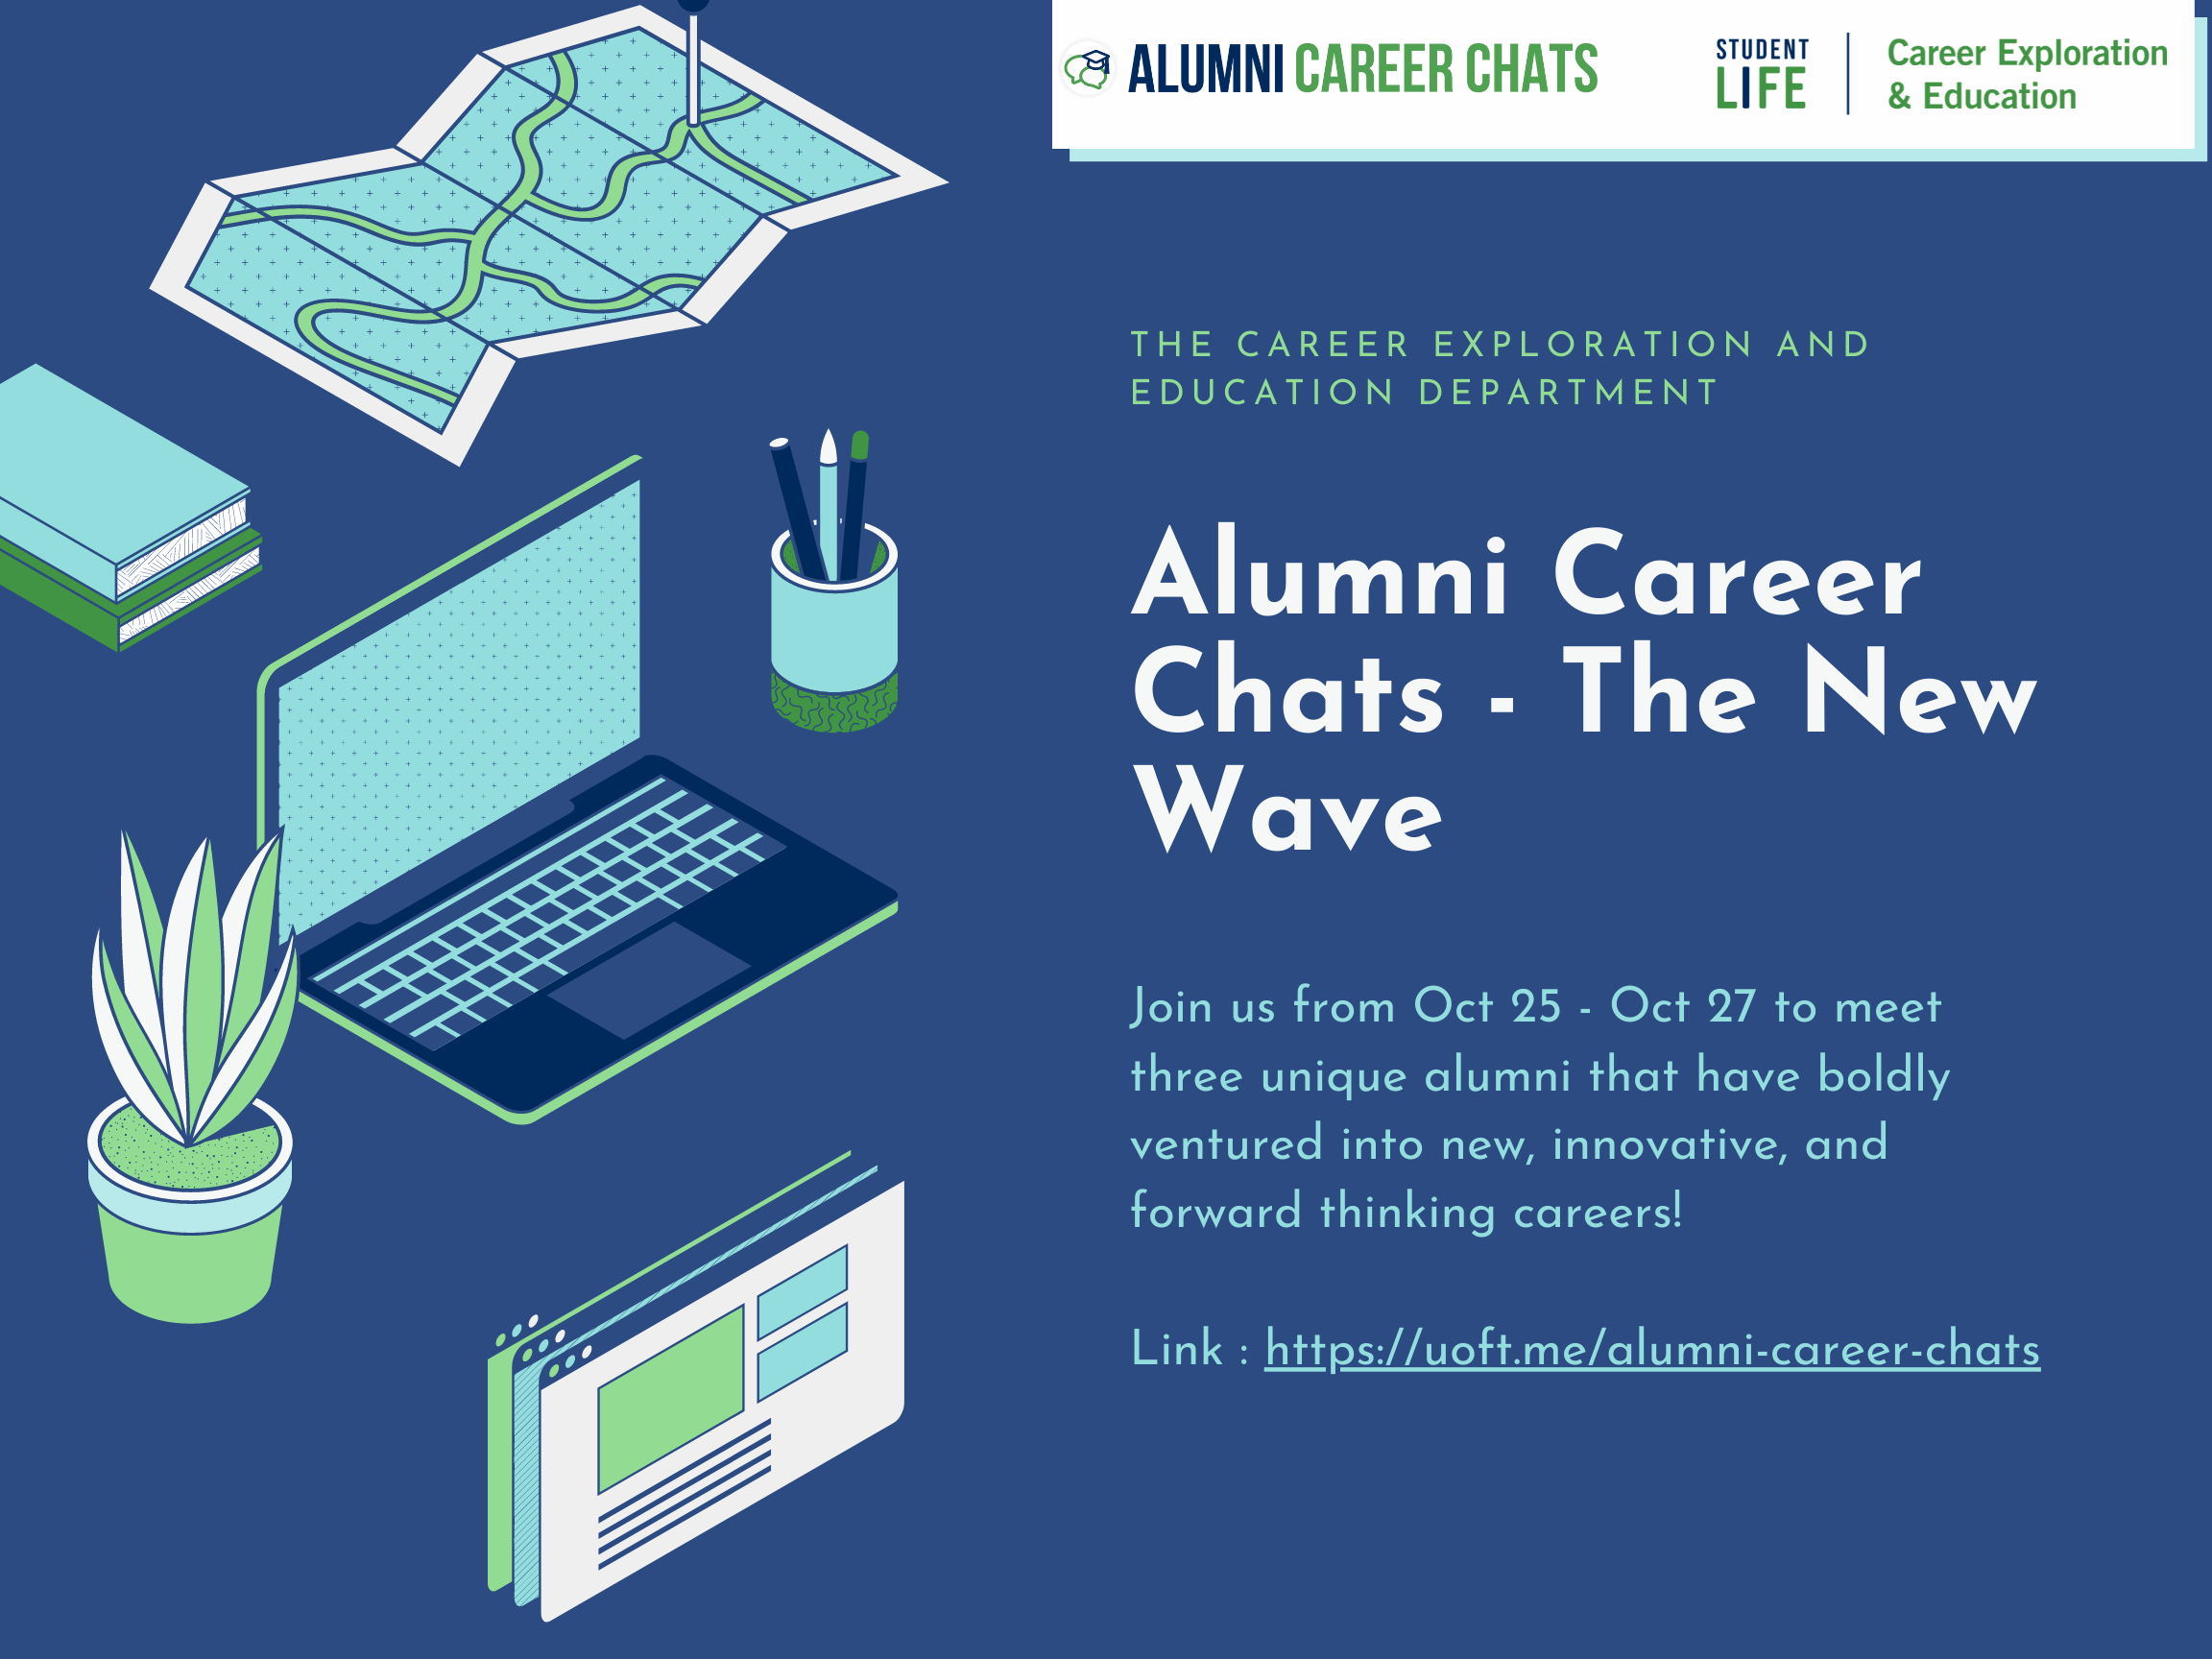 Alumni Career Chats: The New Wave